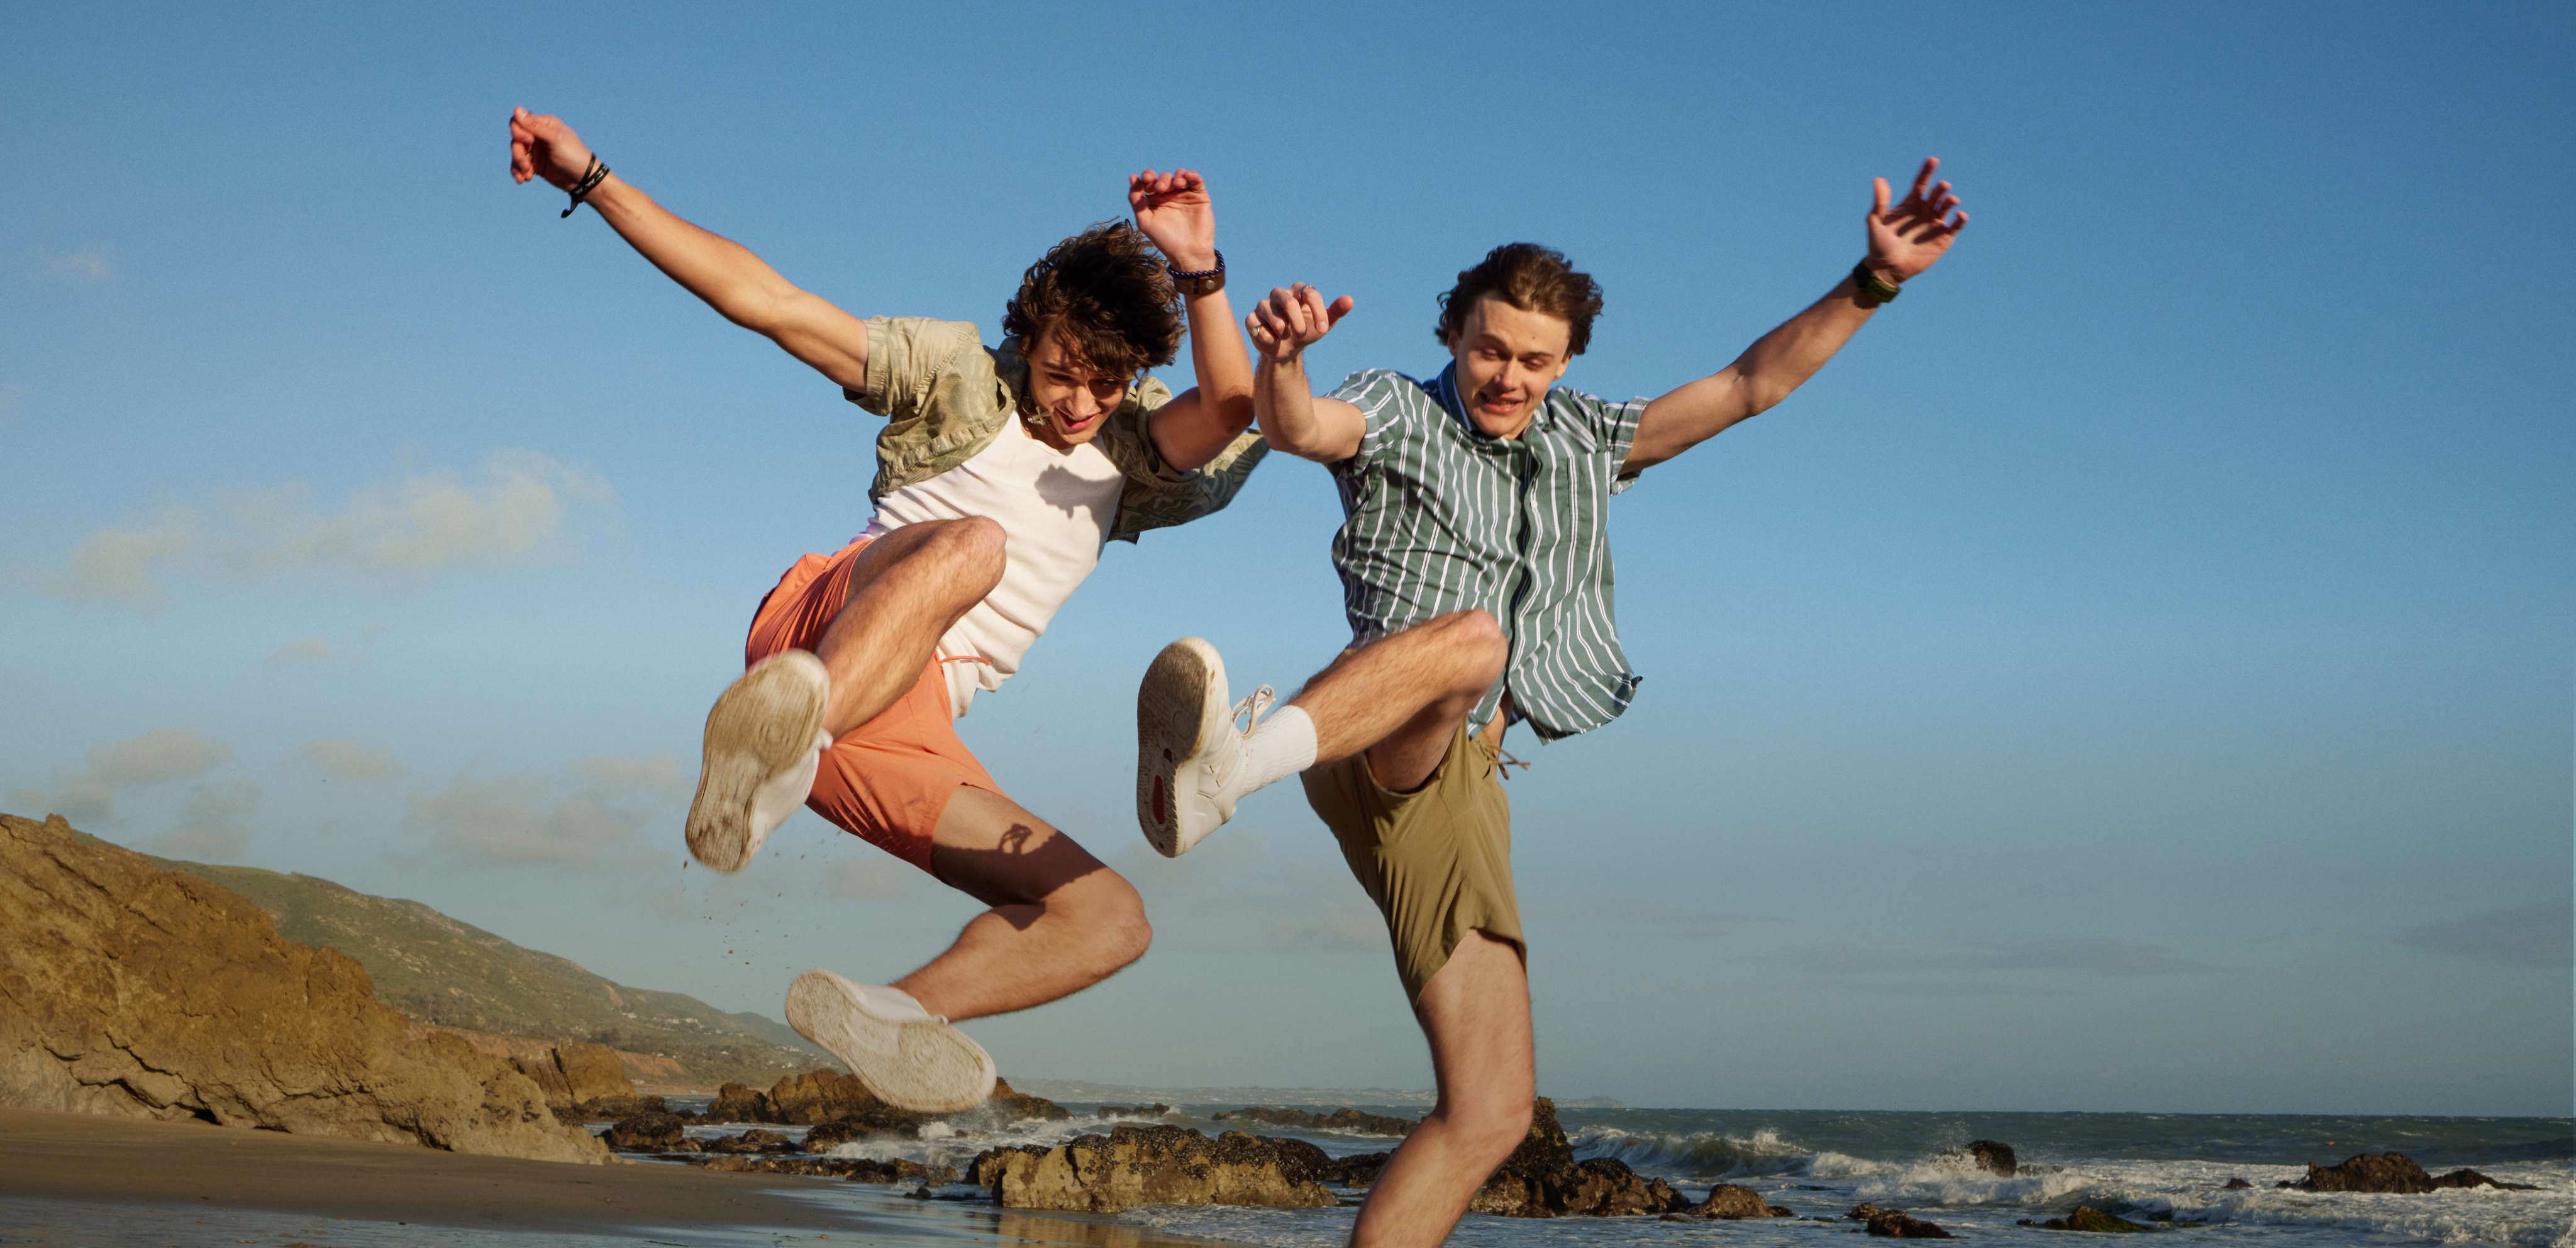 two models wearing AE shorts jumping in the air on a beach